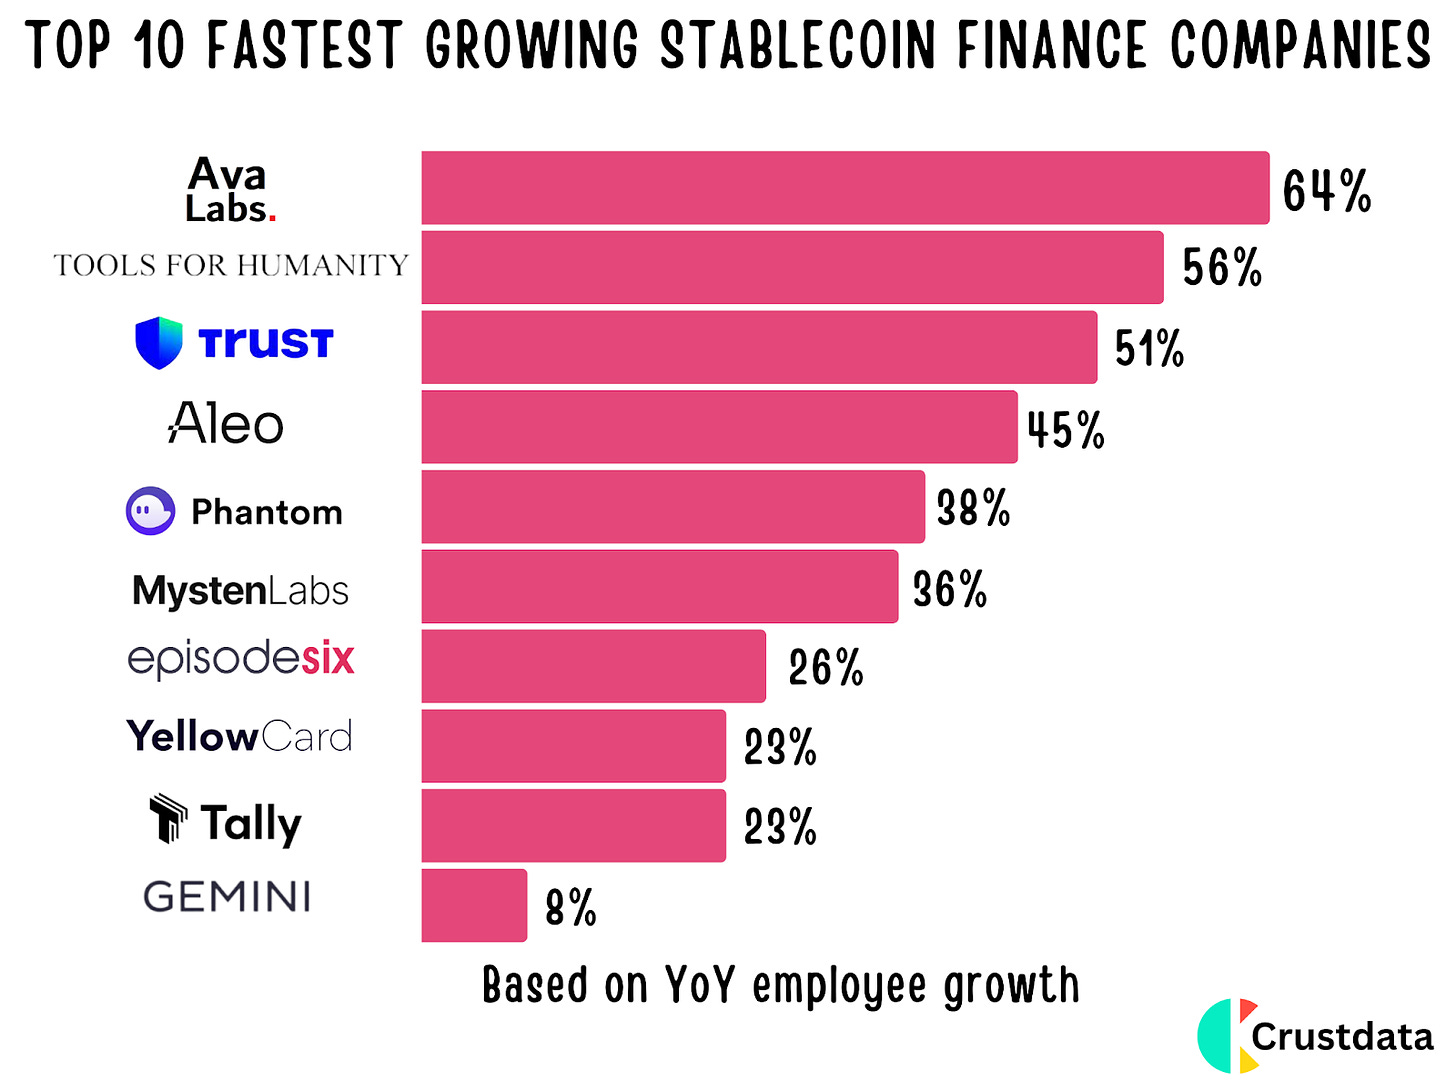 Top 10 Fastest Growing Stablecoin Finance Companies: Ava Labs, Tools For Humanity, Trust, Aleo, Phantom, Mysten Labs, Episode Six, Yellow Card, Tally, GEMINI